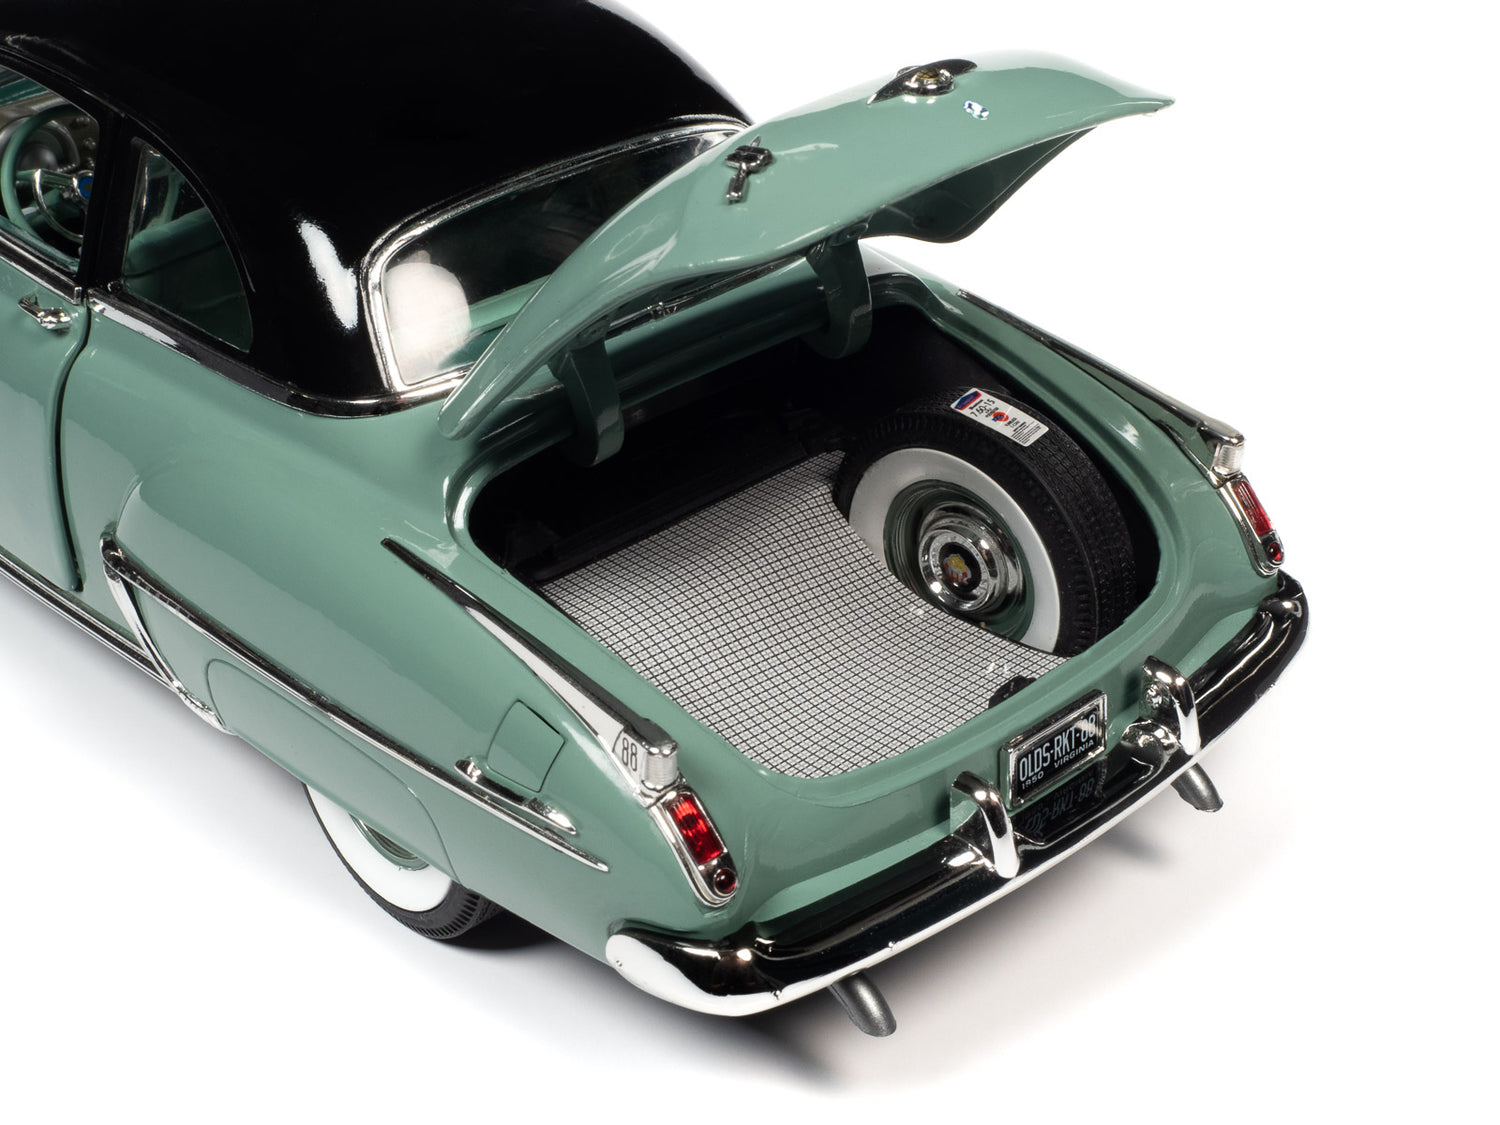 Trunk View of 1950s American Muscle oldsmobile 88 rocket 1:18 scale diecast